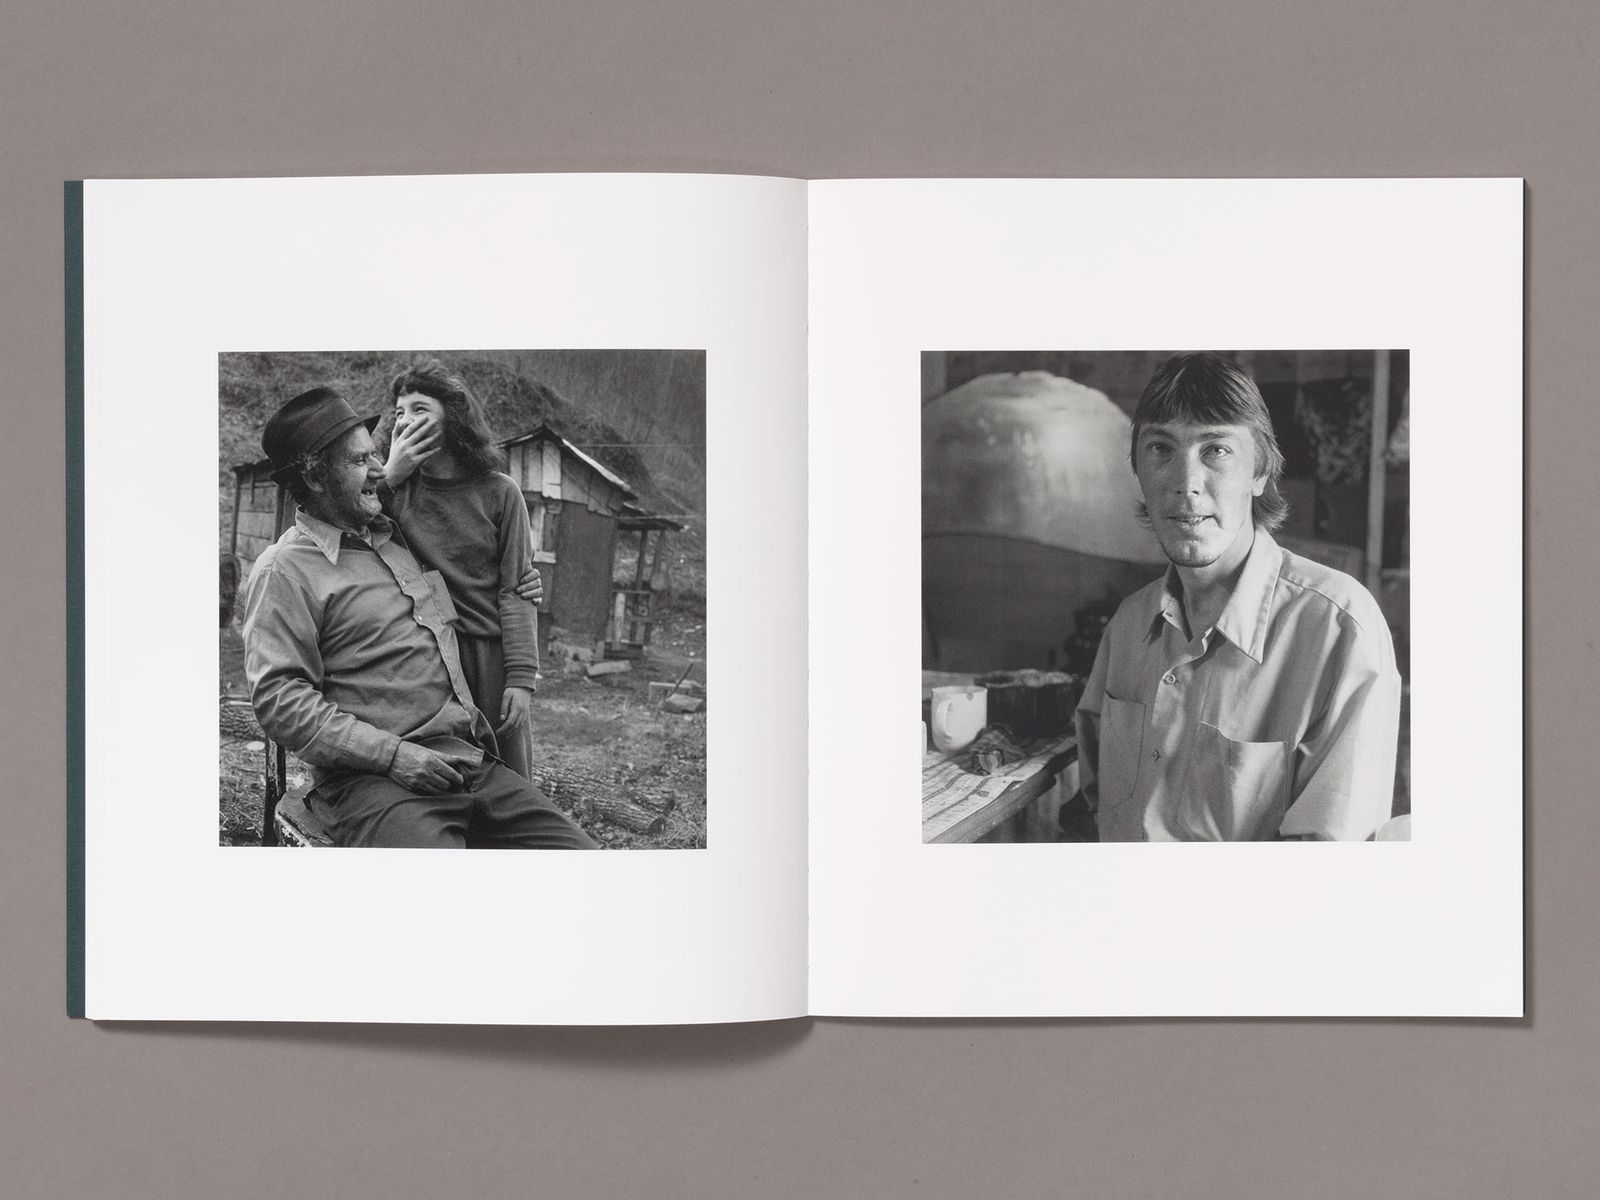 Photobook Review: You Will Look to the Mountain by Anne Rearick